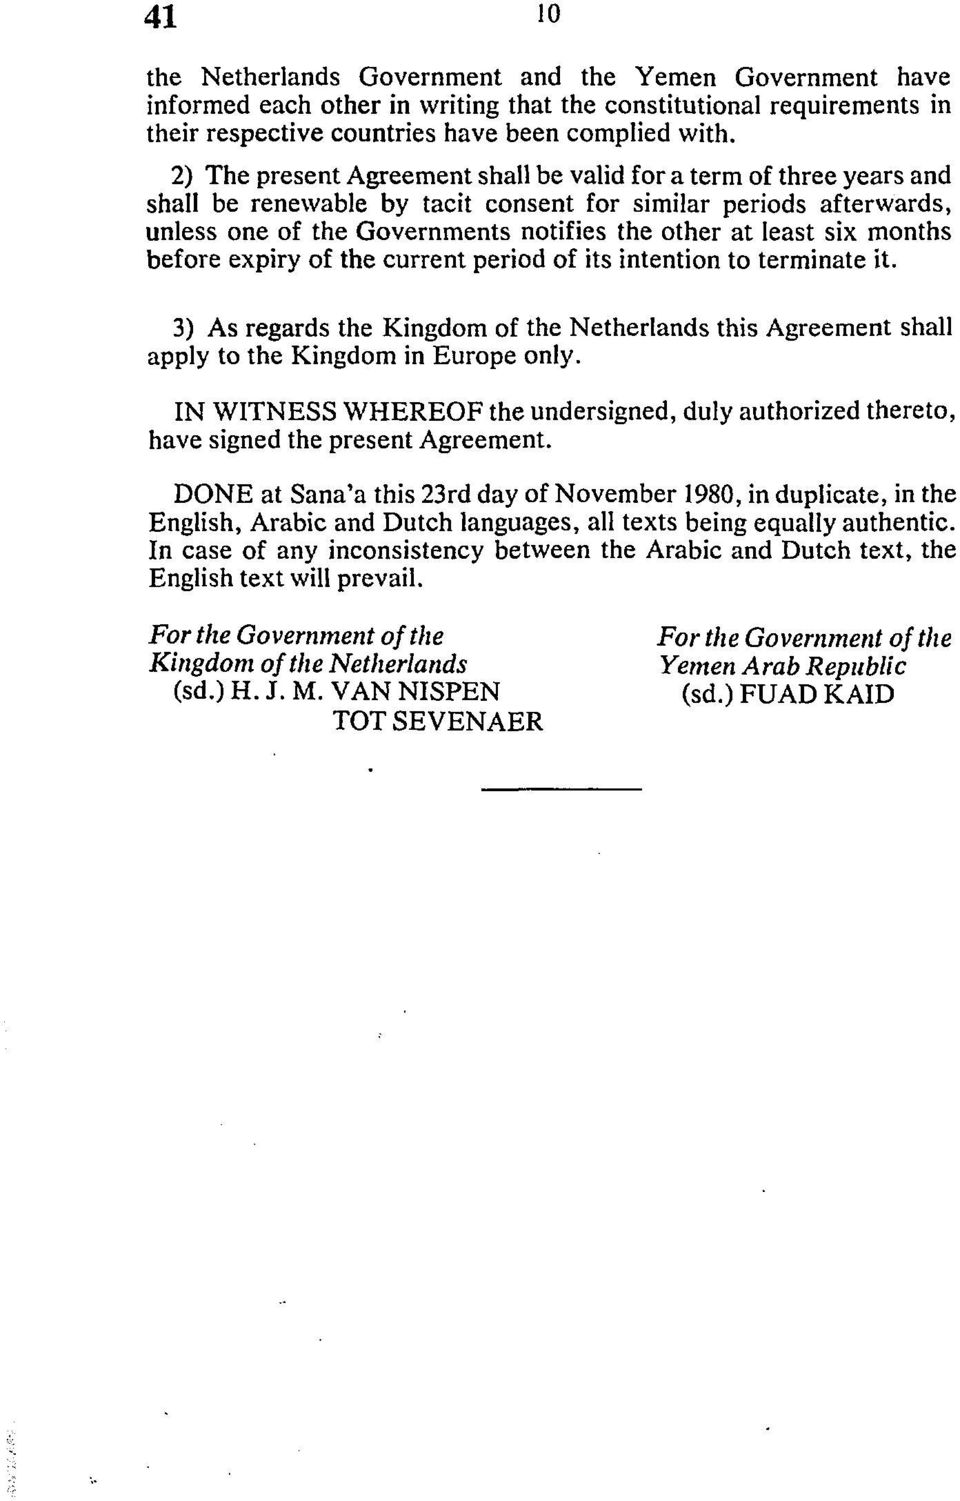 months before expiry of the current period of its intention to terminate it. 3) As regards the Kingdom of the Netherlands this Agreement shall apply to the Kingdom in Europe only.